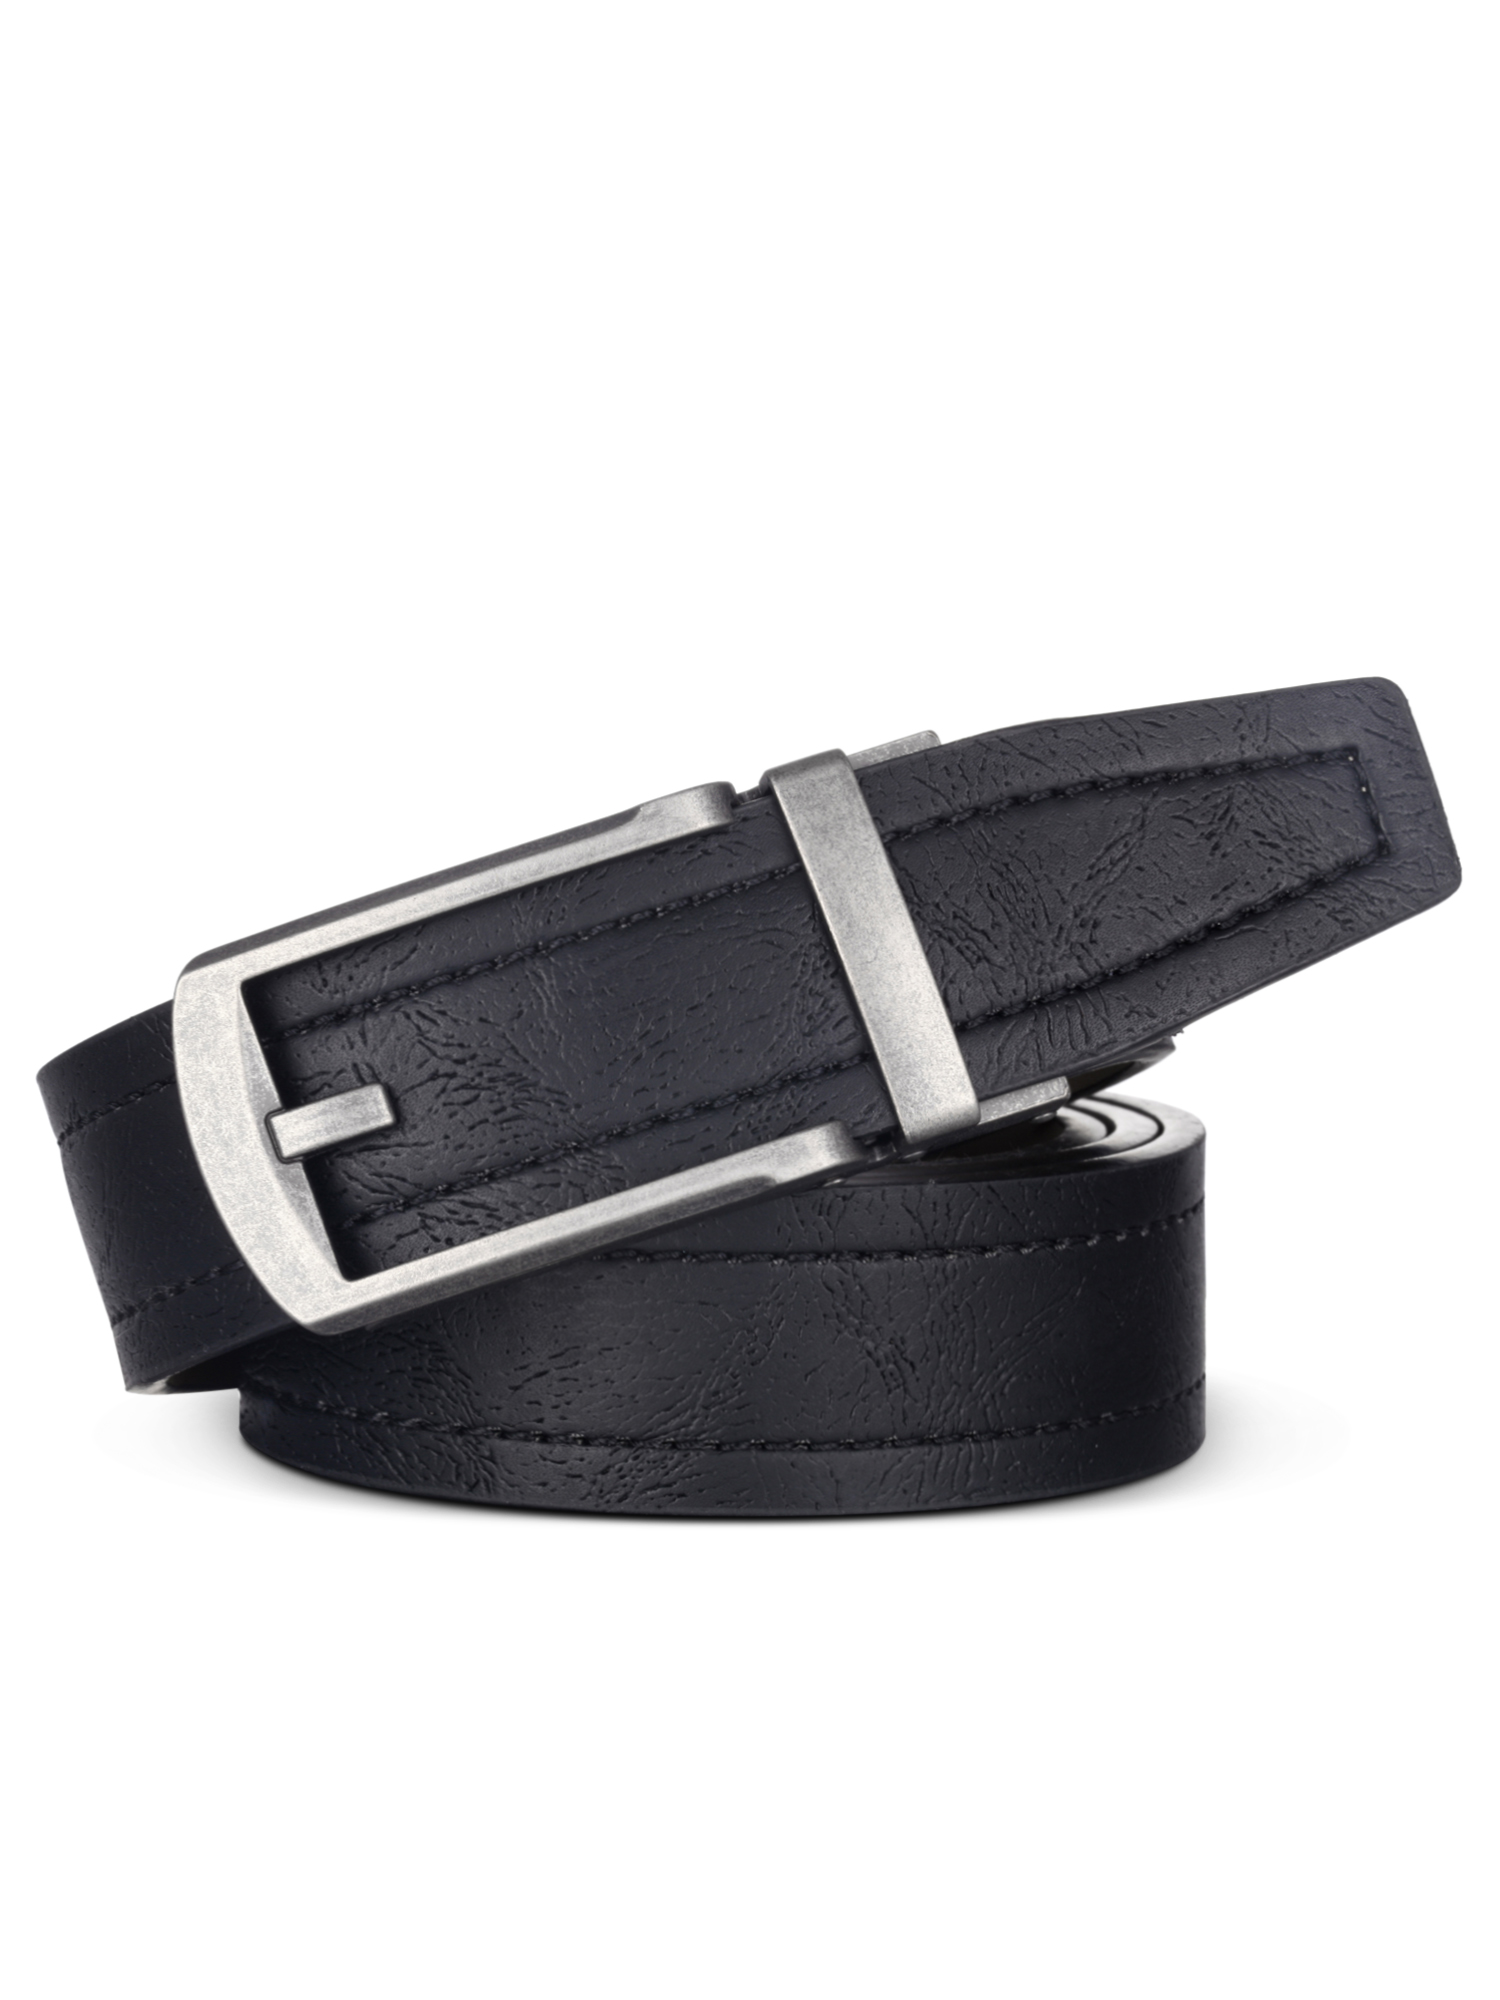 Marino Men's Comfort Click Ratchet Belt Casual Leather Belt for Men - Automatic Linxx Buckle, 1.5 Wide with Elegant Gift Box - image 3 of 7